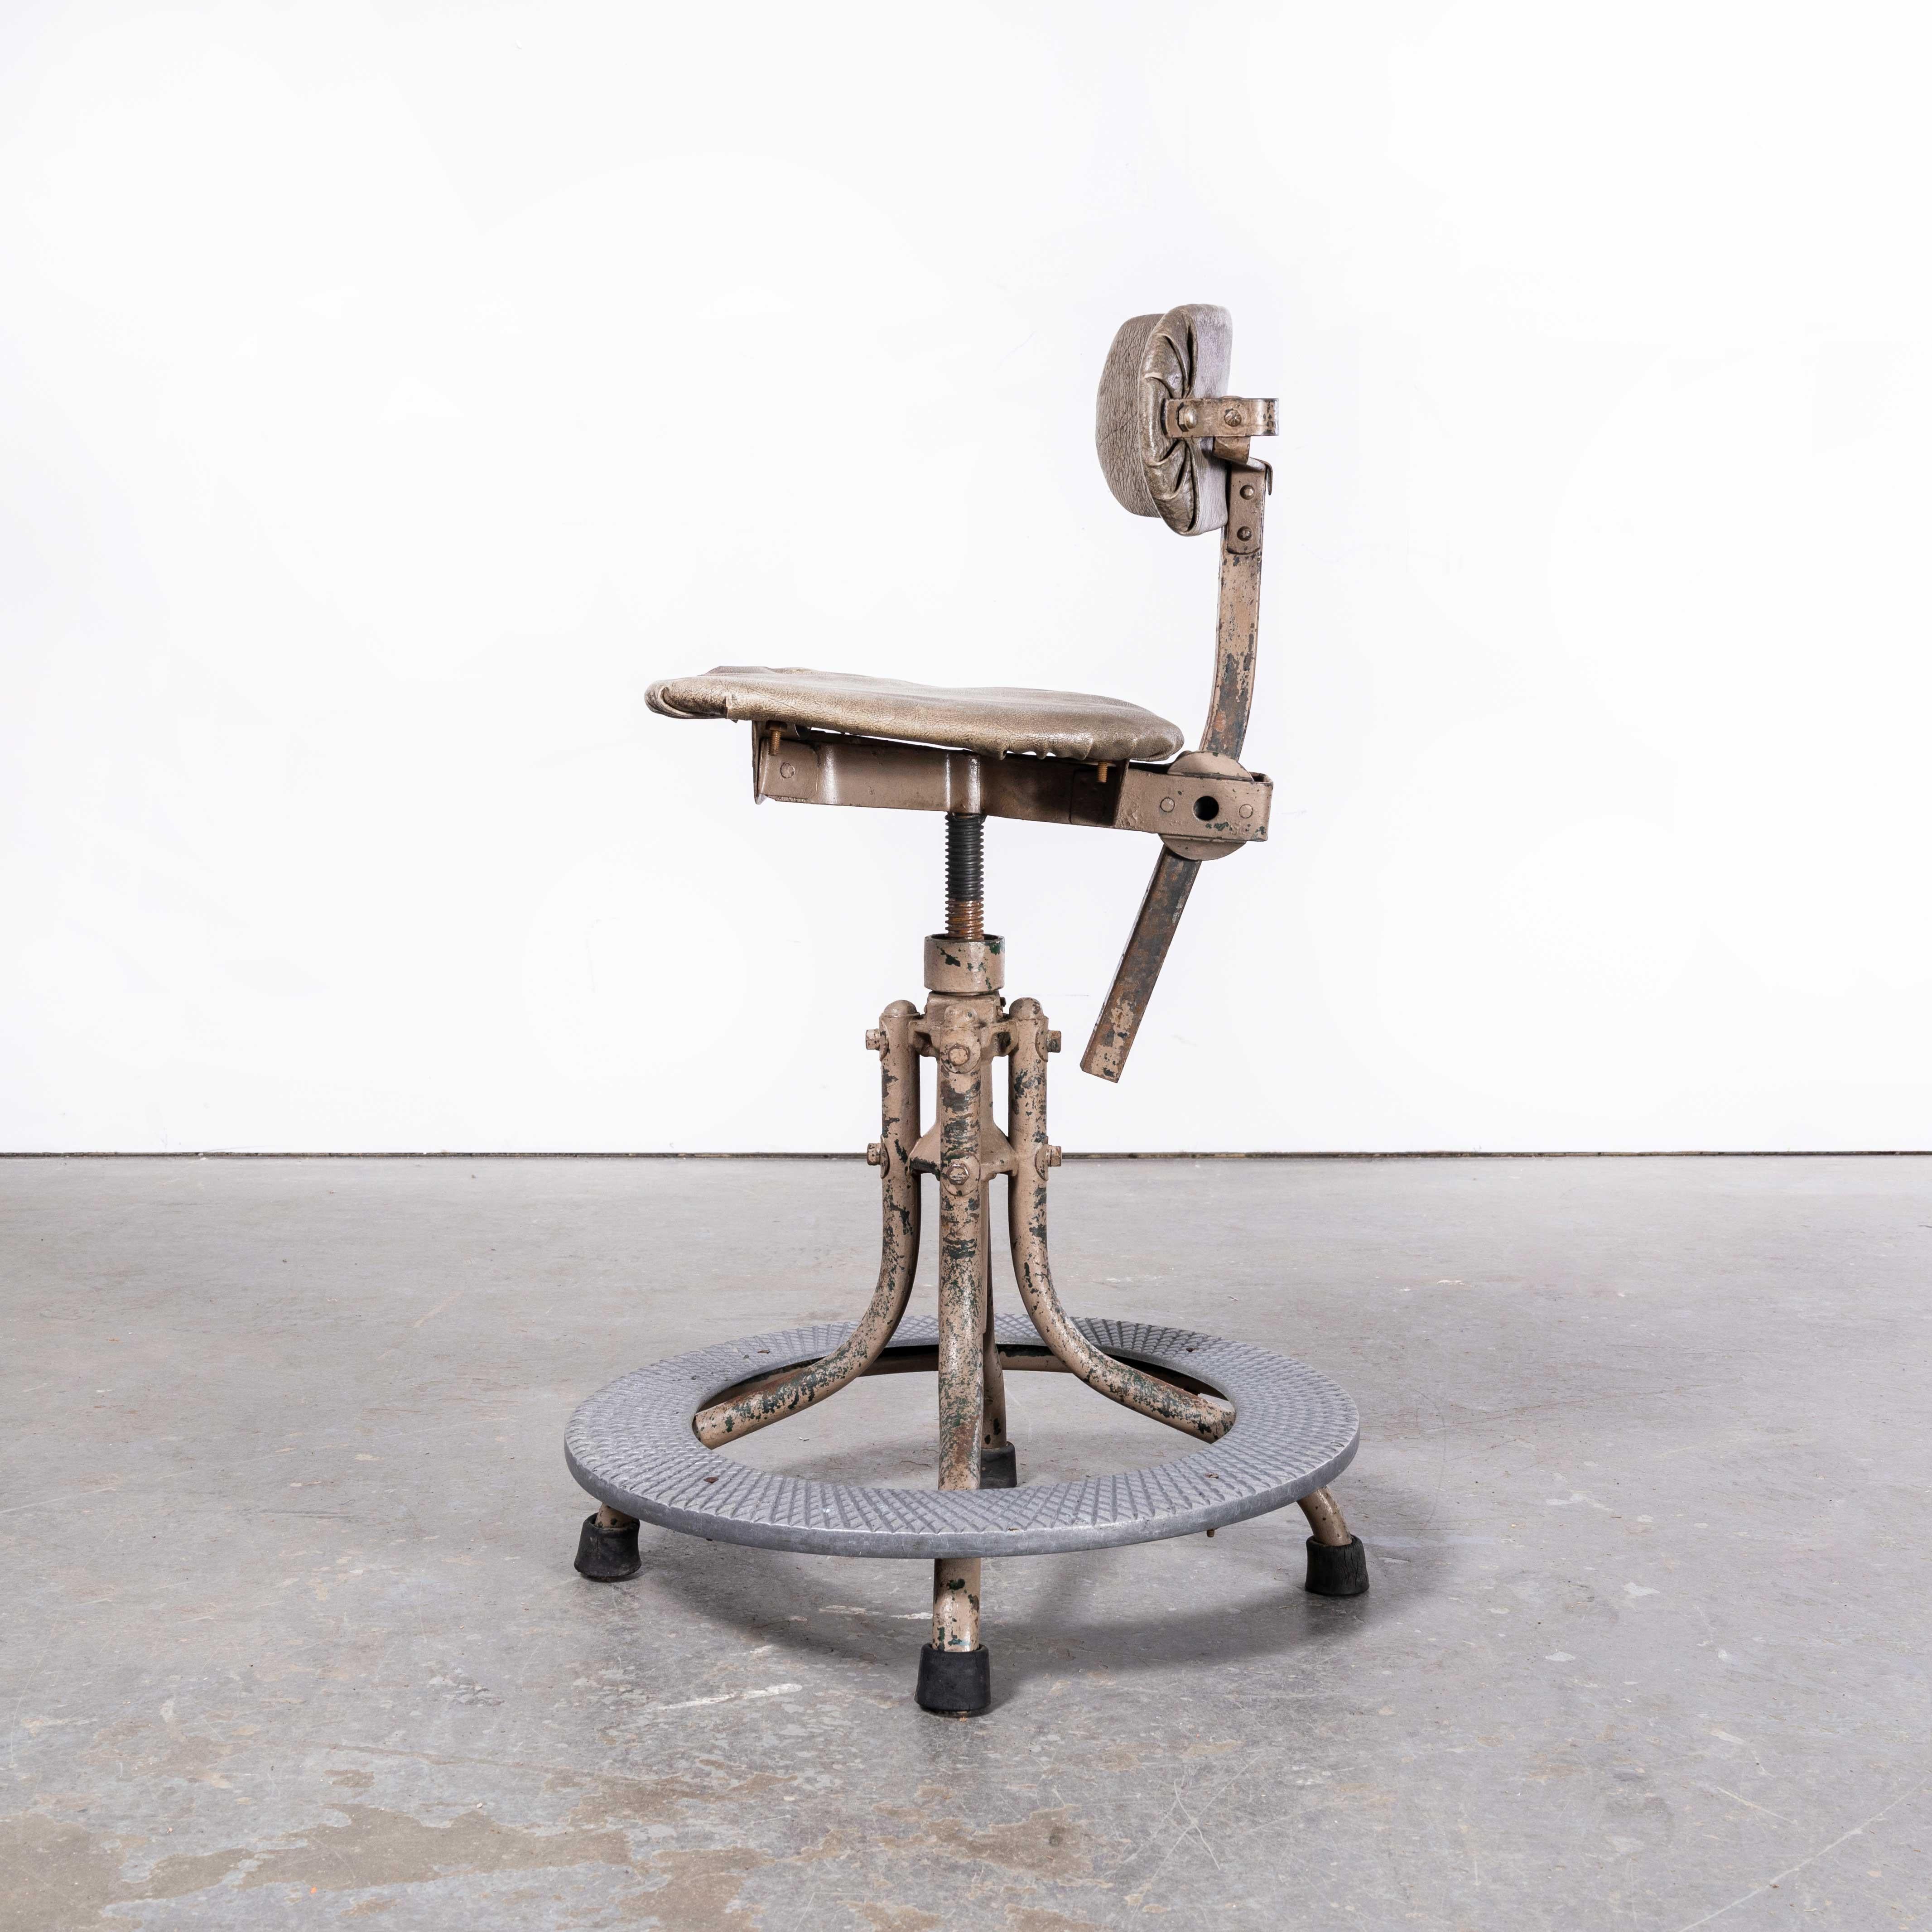 1950s Evertaut Original Machinists Chair, with Foot Support '2518' For Sale 3